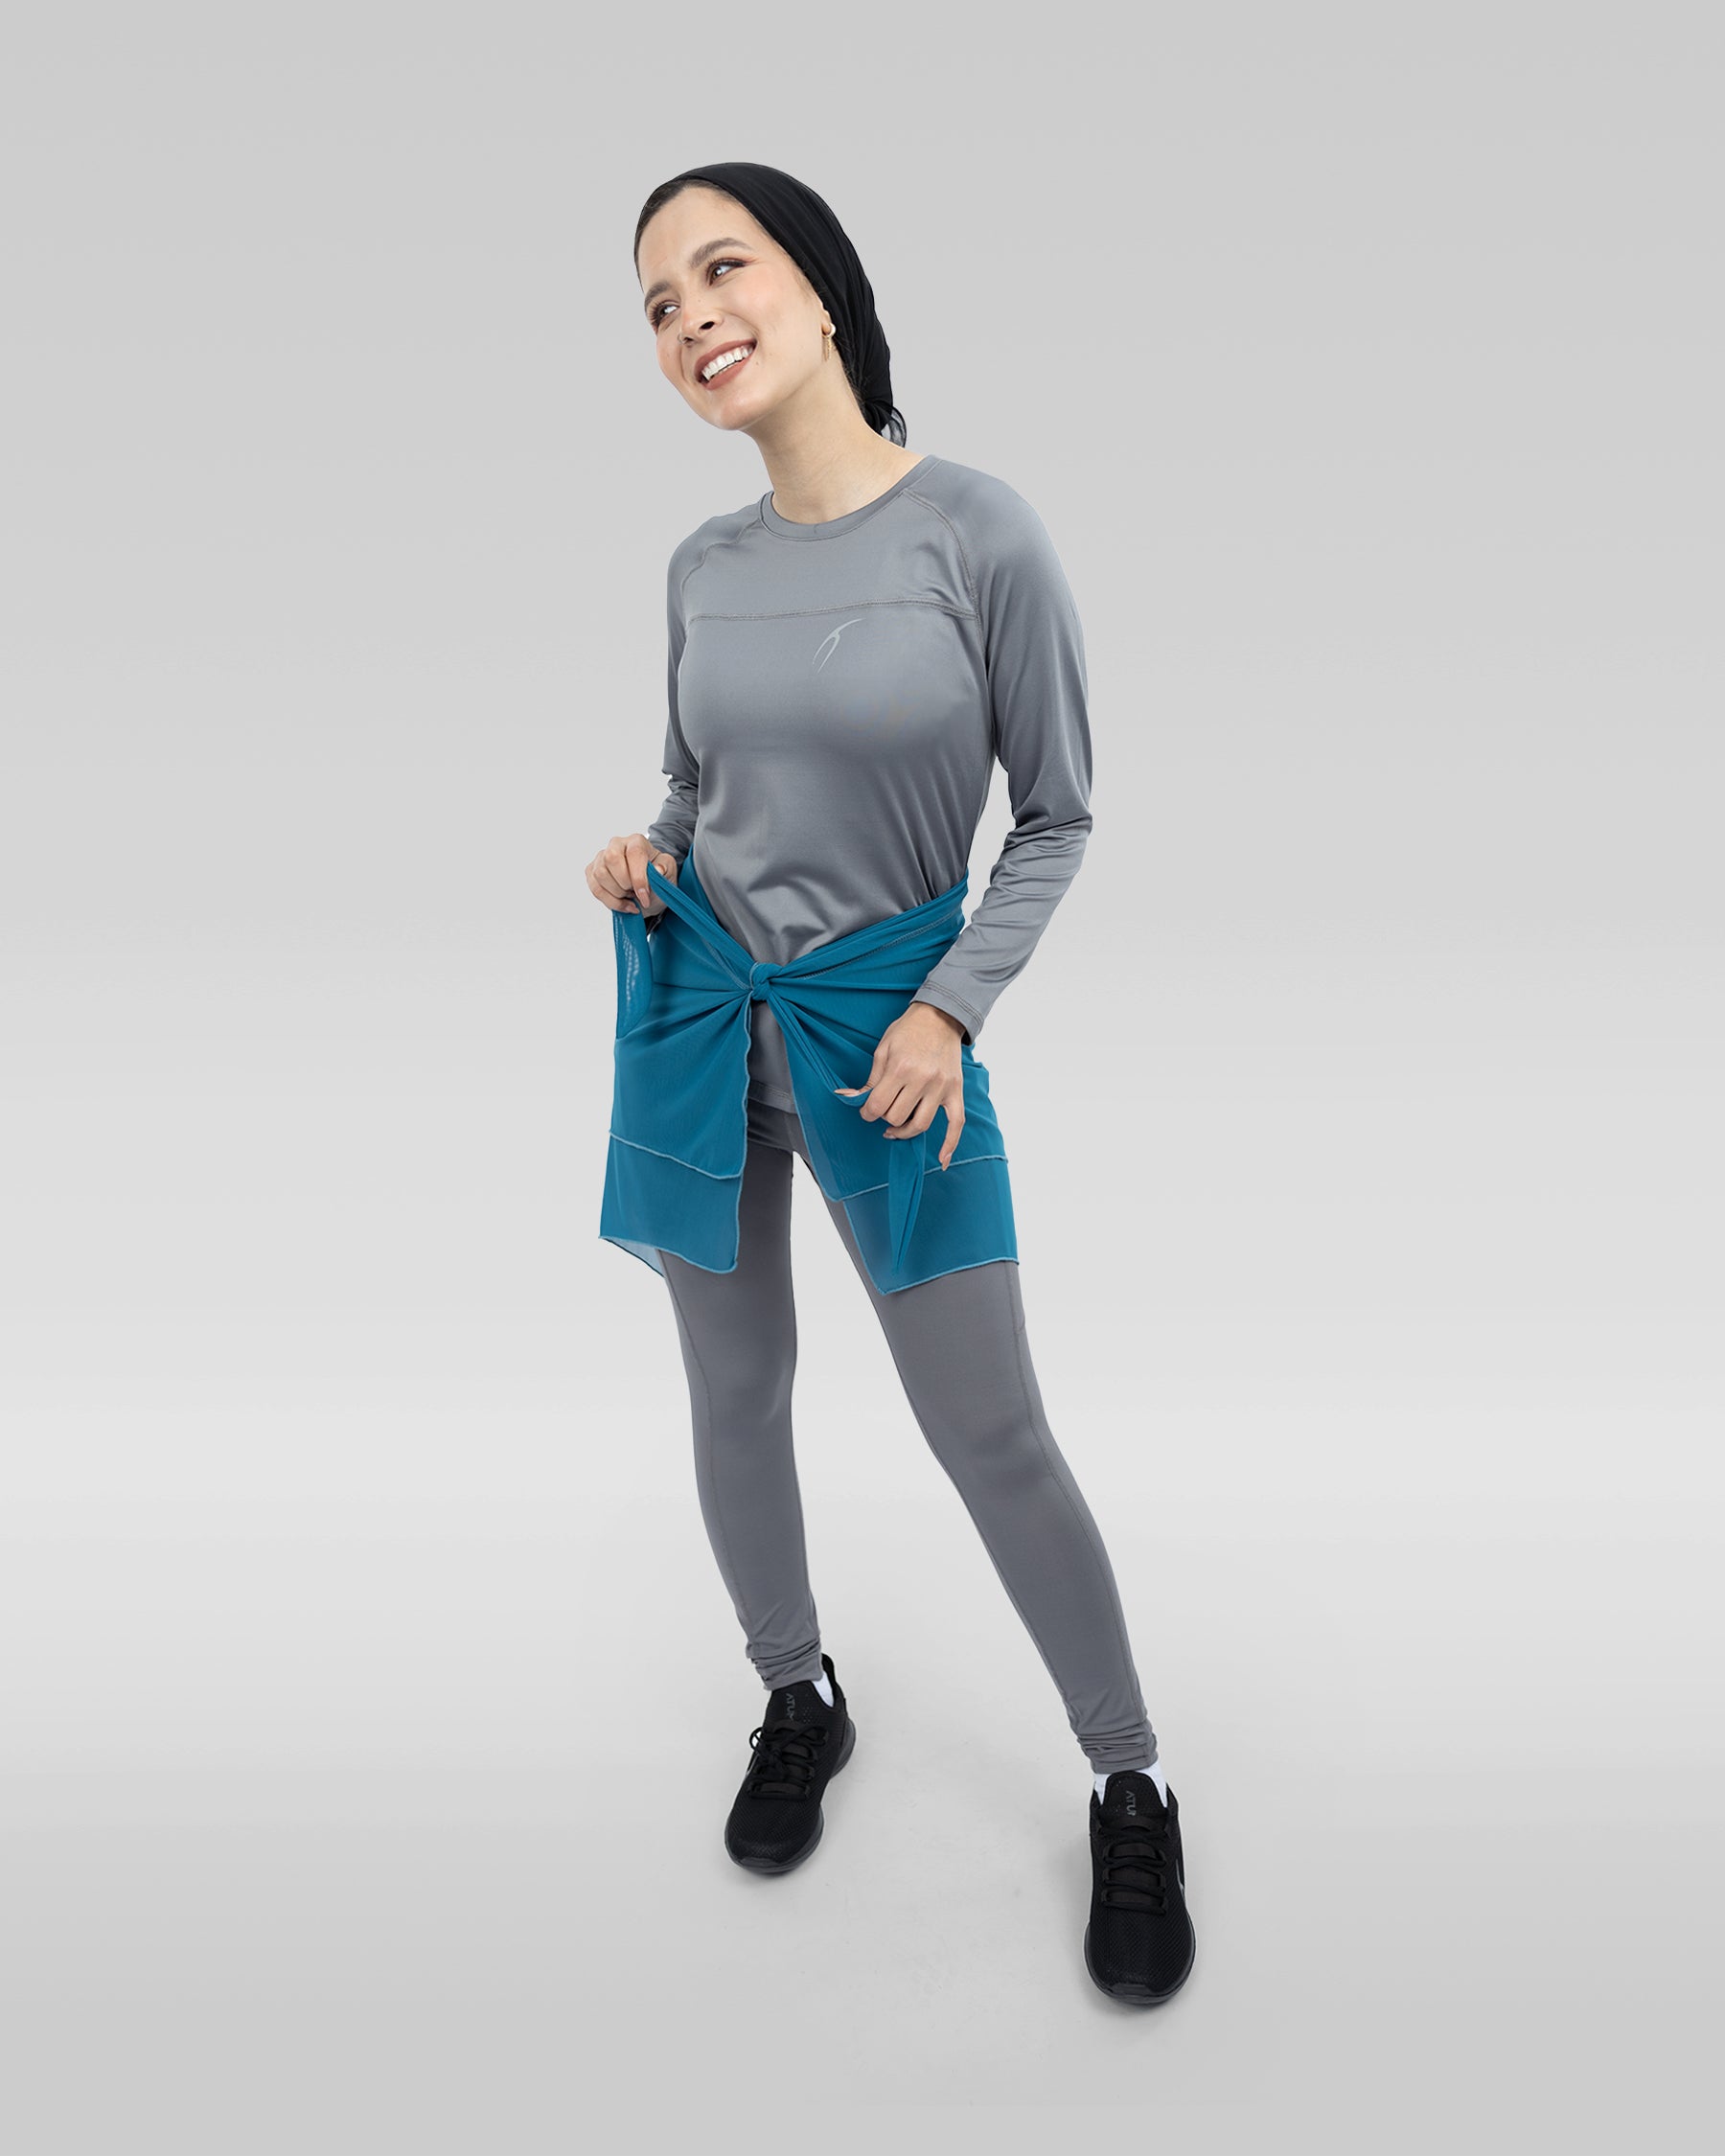 The image features a woman standing in a room, wearing a gray shirt and blue pants. She is posing for the camera, smiling and looking at the camera.